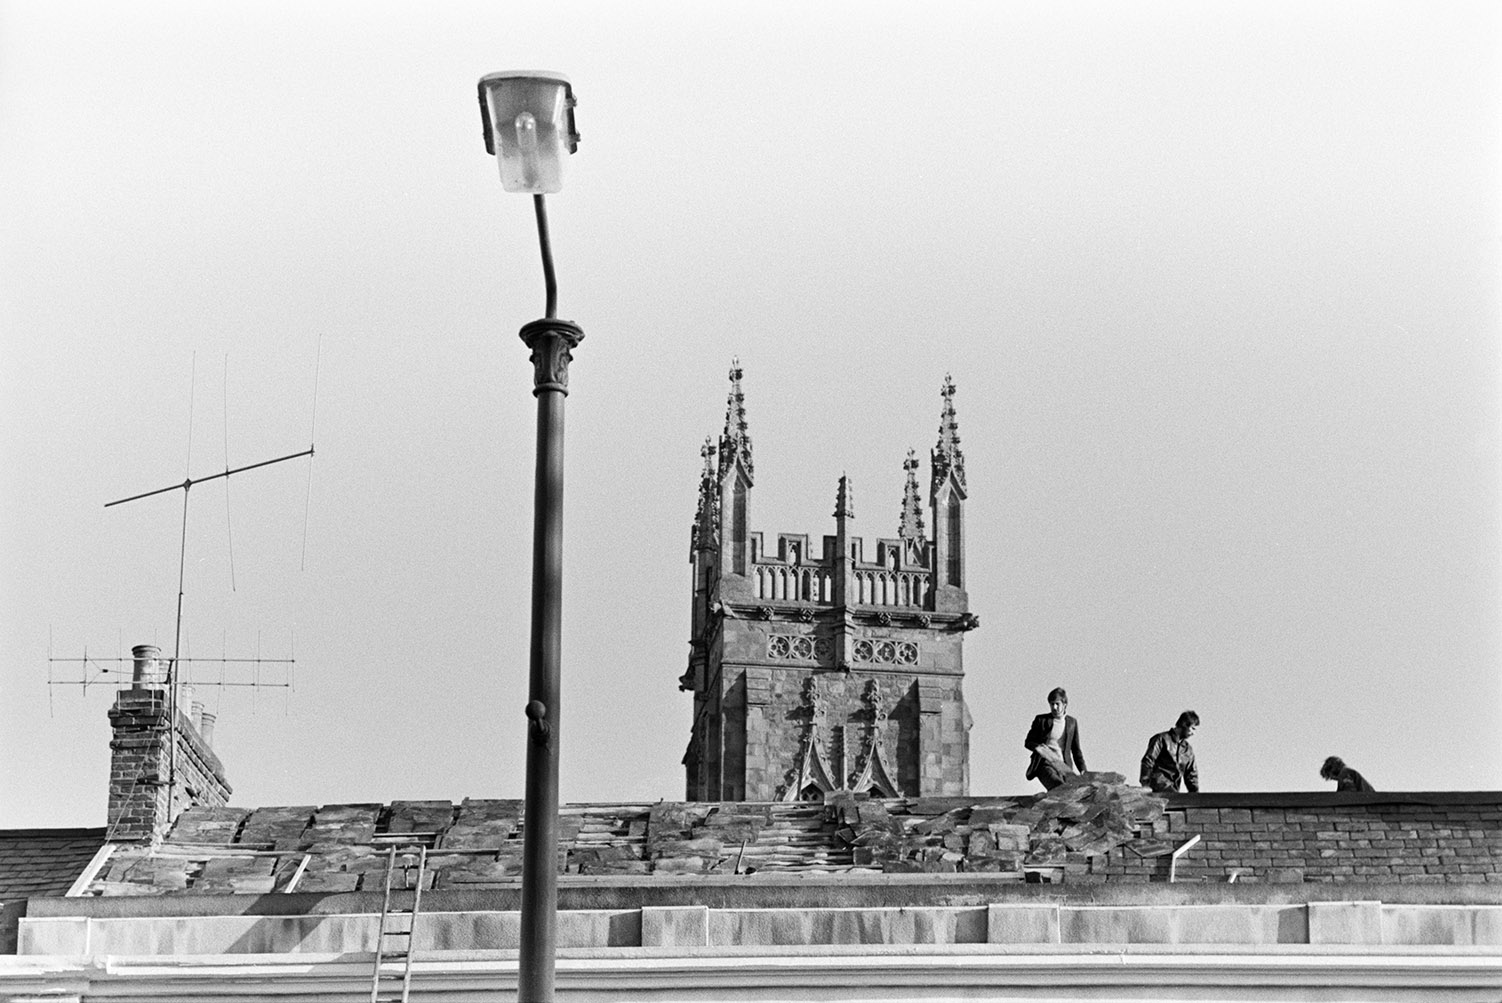 Three men working on the slate roof of terraced houses in Barnstaple. A church tower is visible in the background and  street lamp is in the foreground.